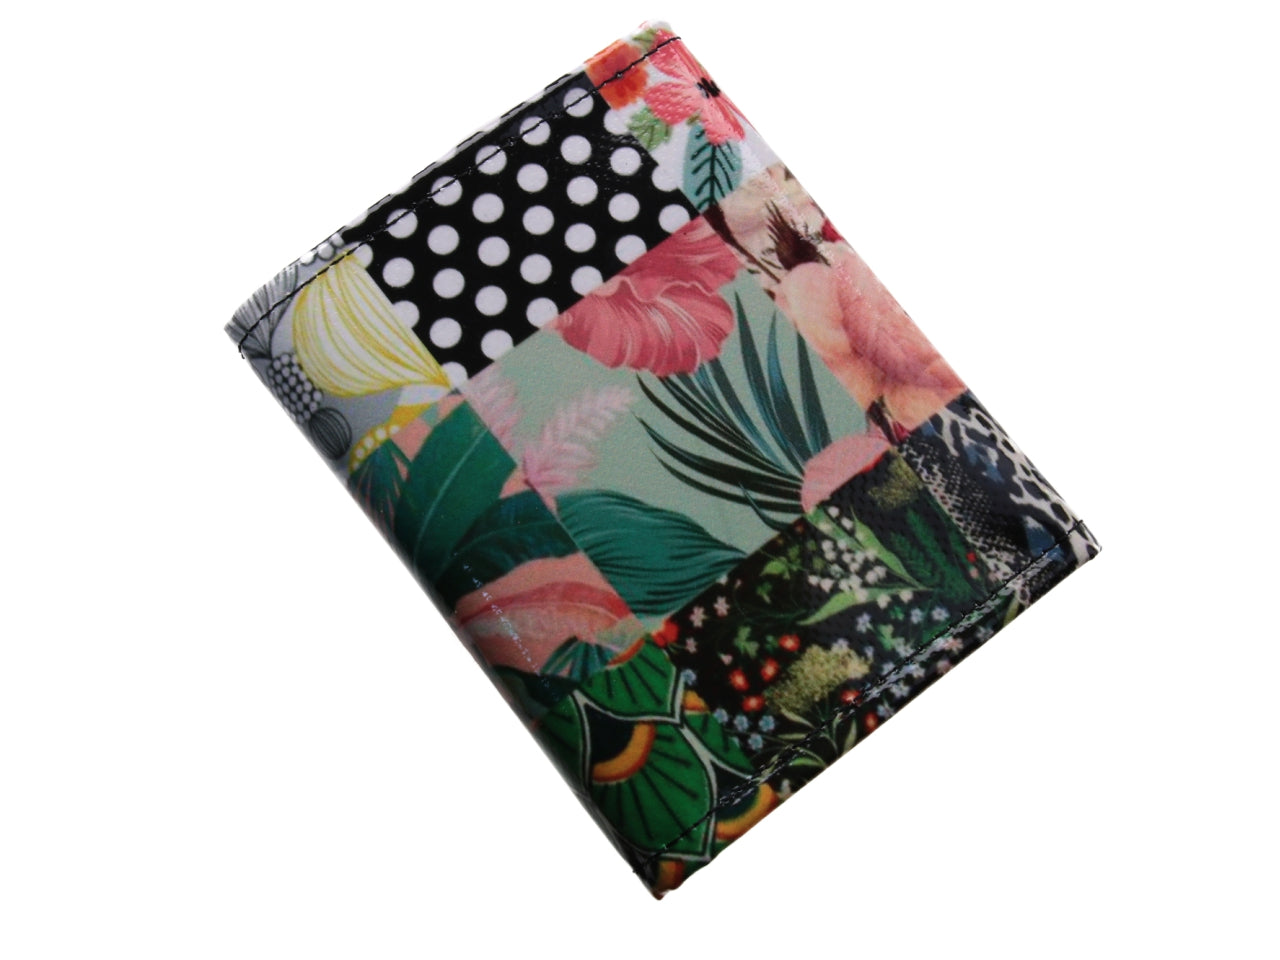 WOMEN'S WALLET FLORAL FANTASY. MODEL TREK MADE OF LORRY TARPAULIN. - Limited Edition Paul Meccanico